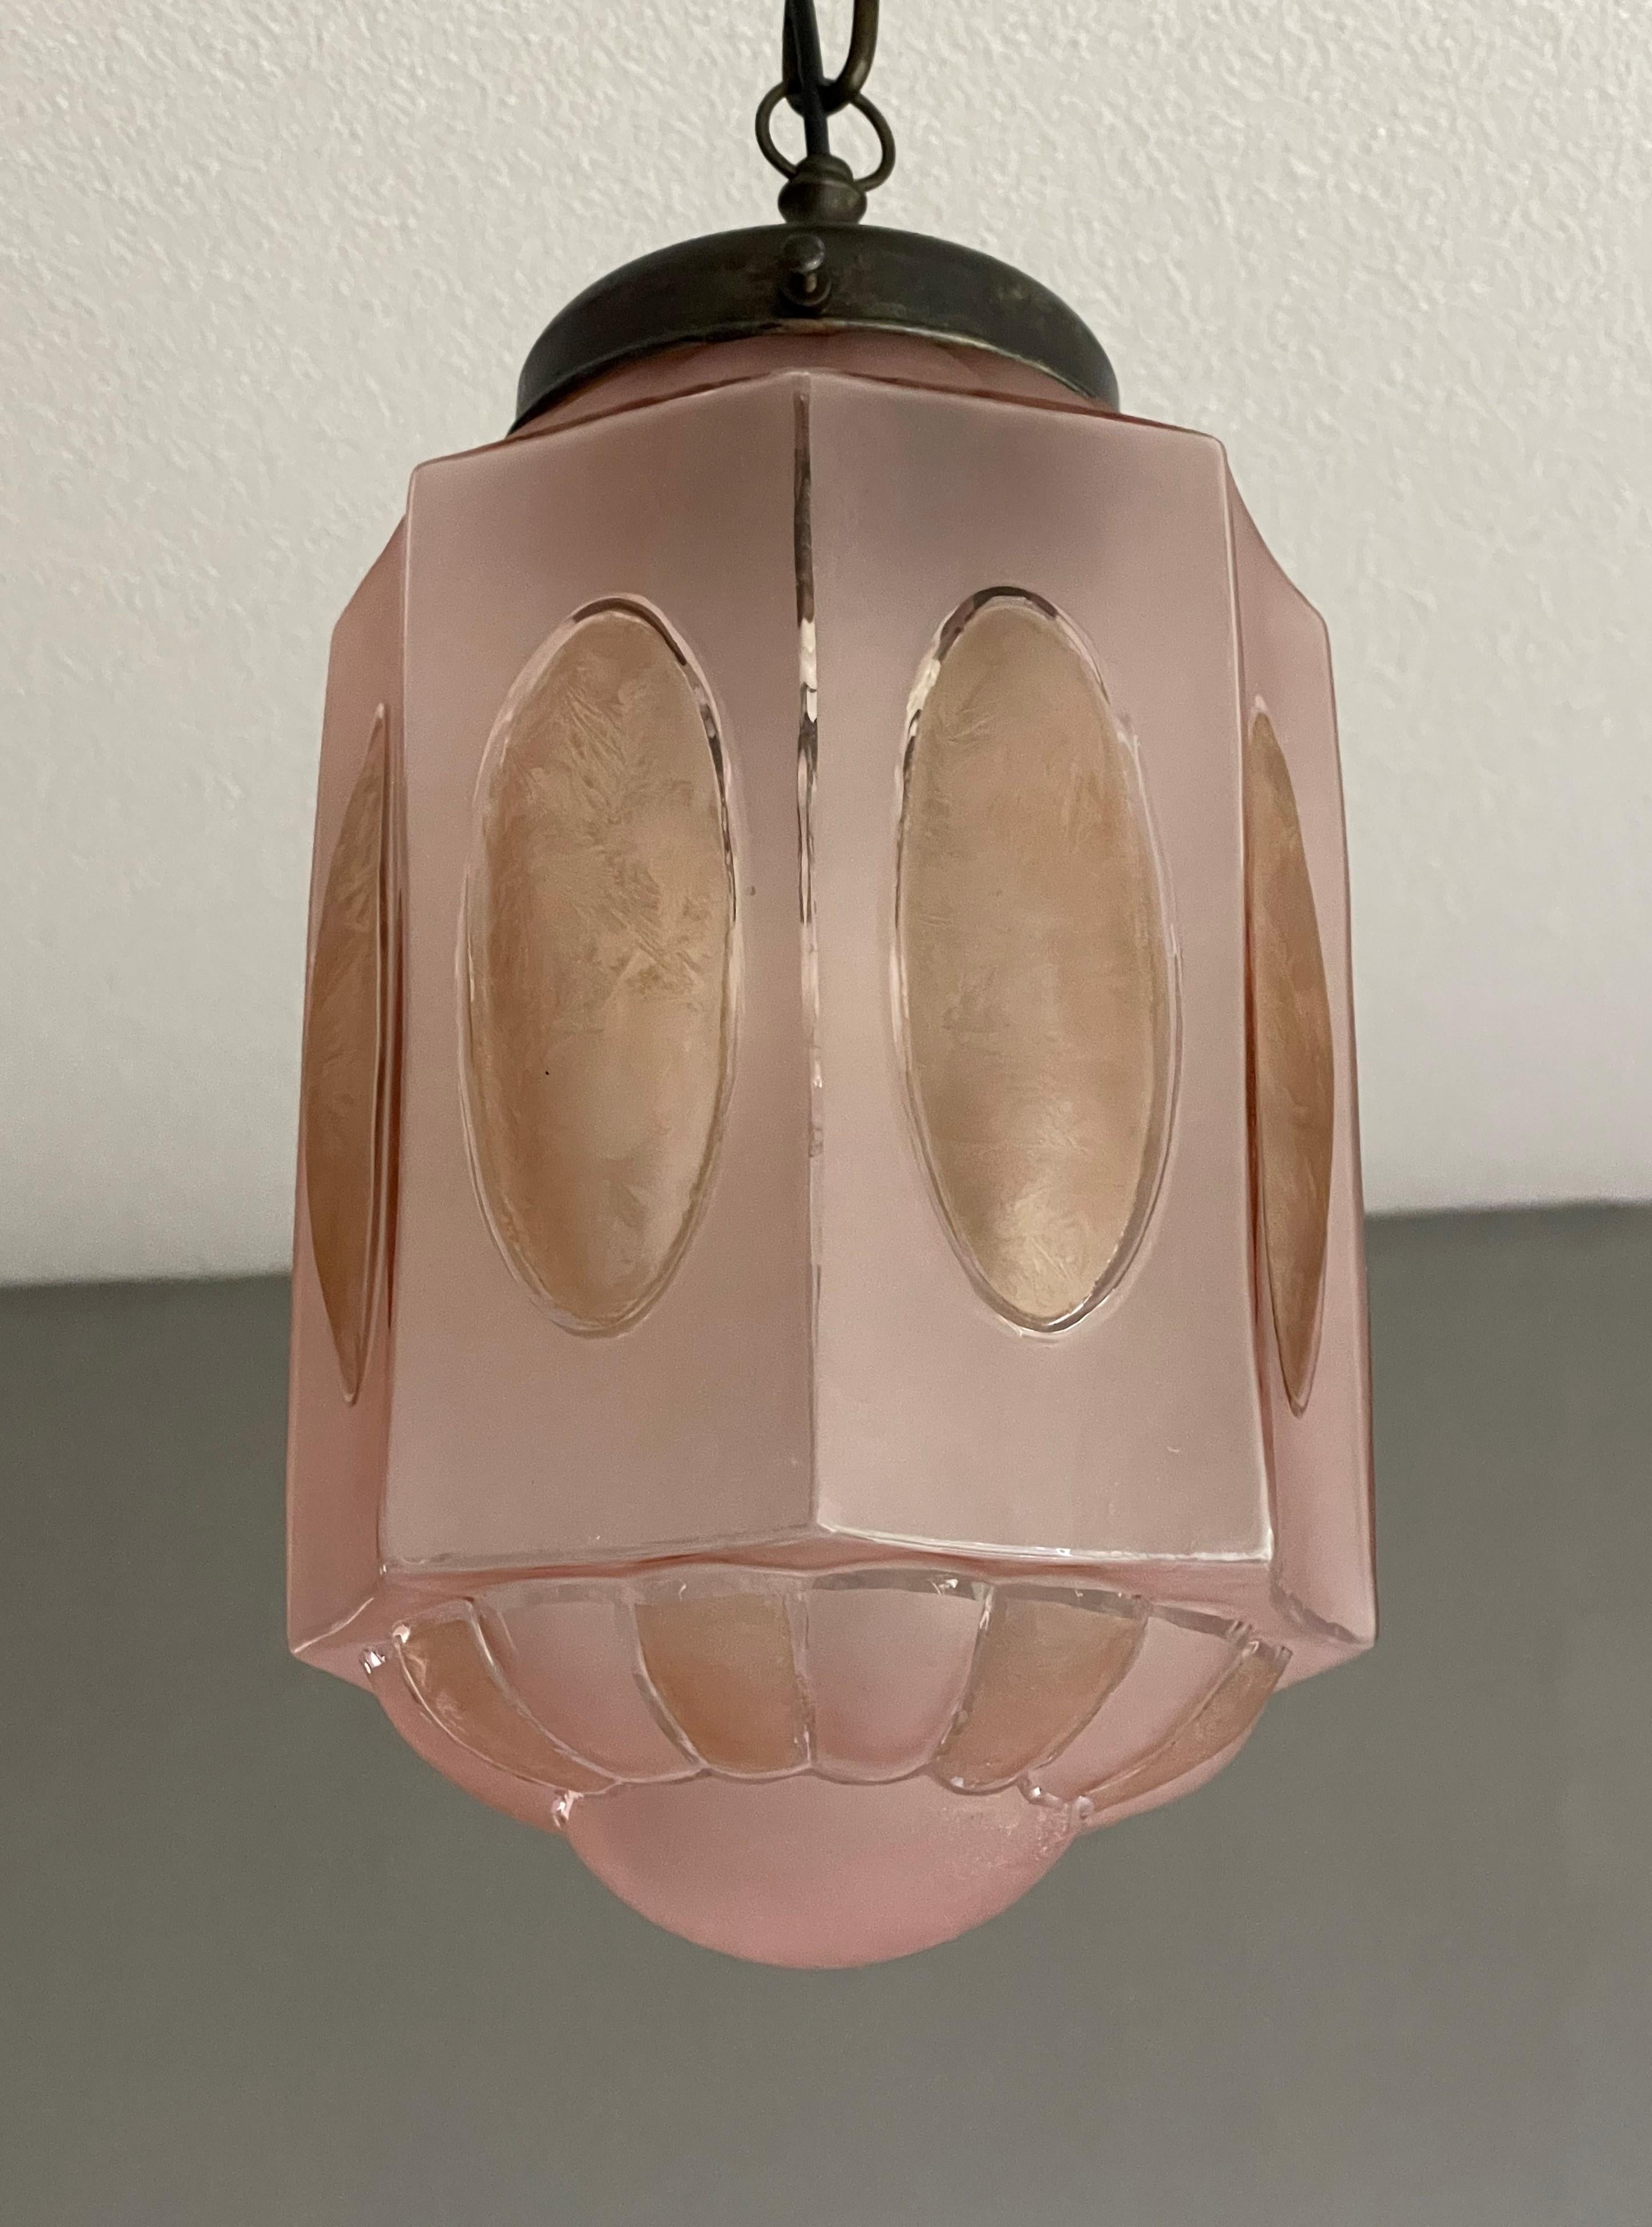 20th Century Rare Art Deco Pendant Light Fixture w. Octagonal Satinated & Frosted Glass Shade For Sale